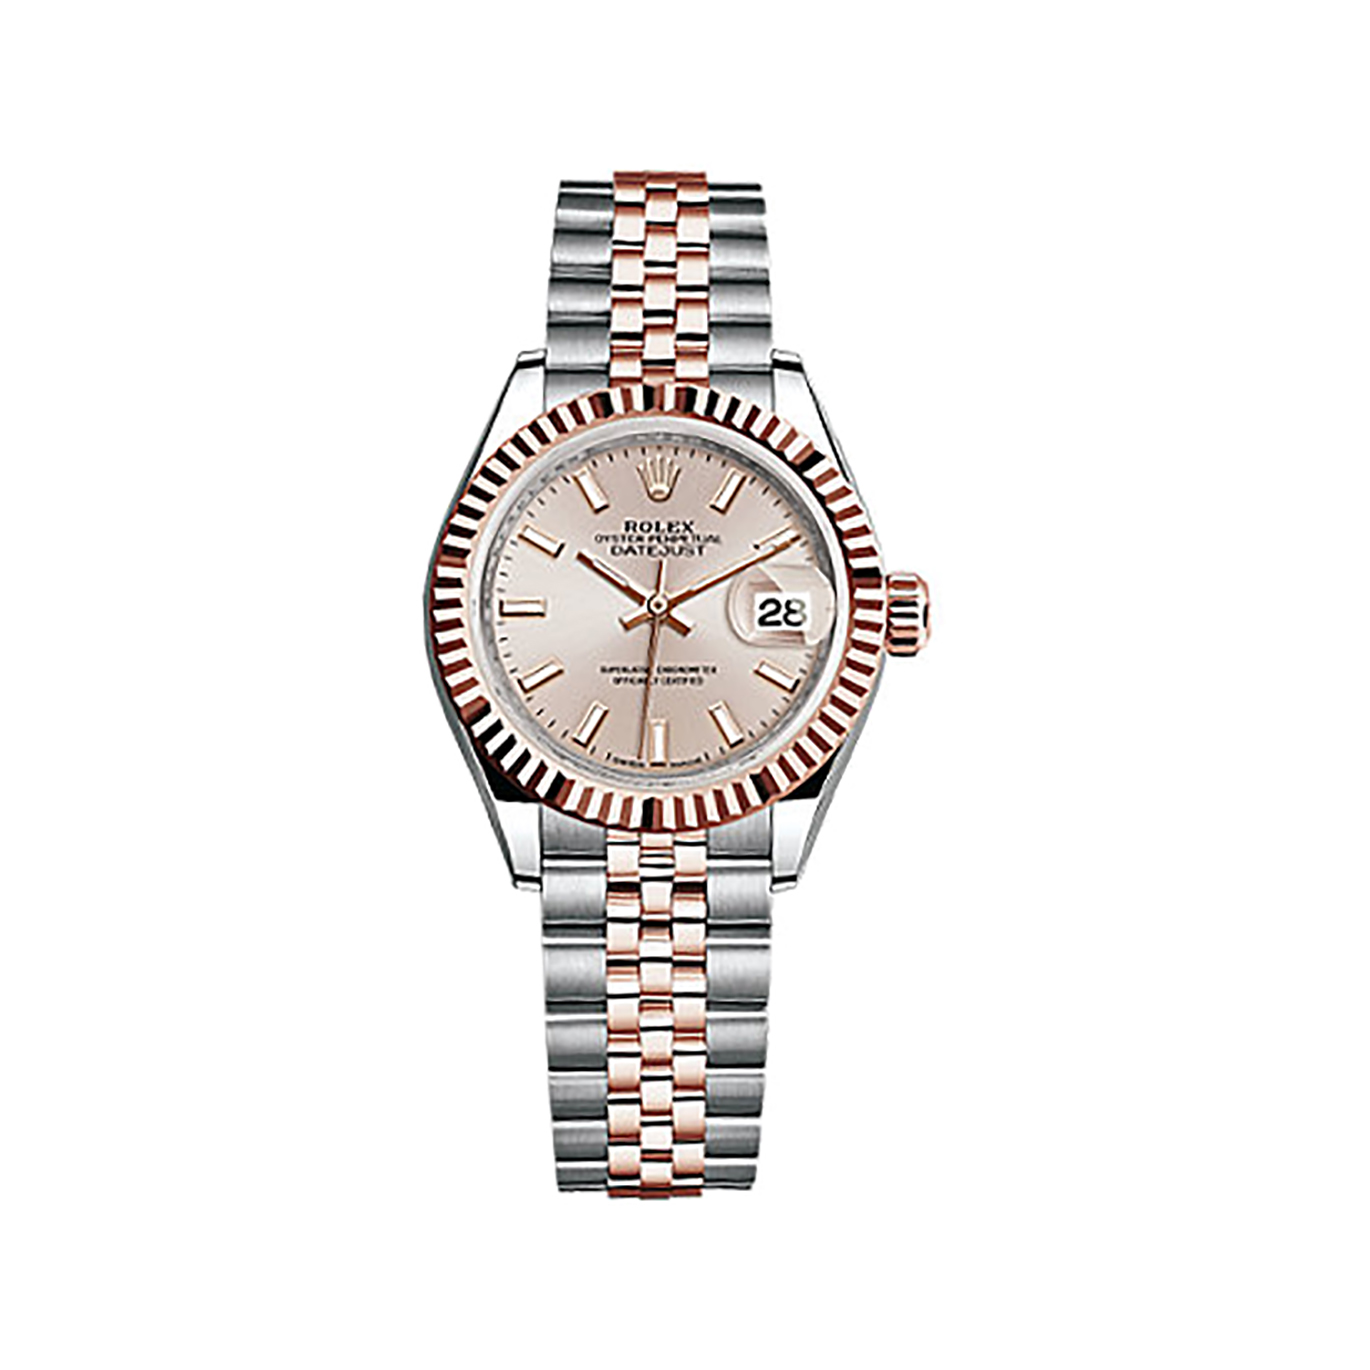 Lady-Datejust 28 279171 Rose Gold & Stainless Steel Watch (Sundust)